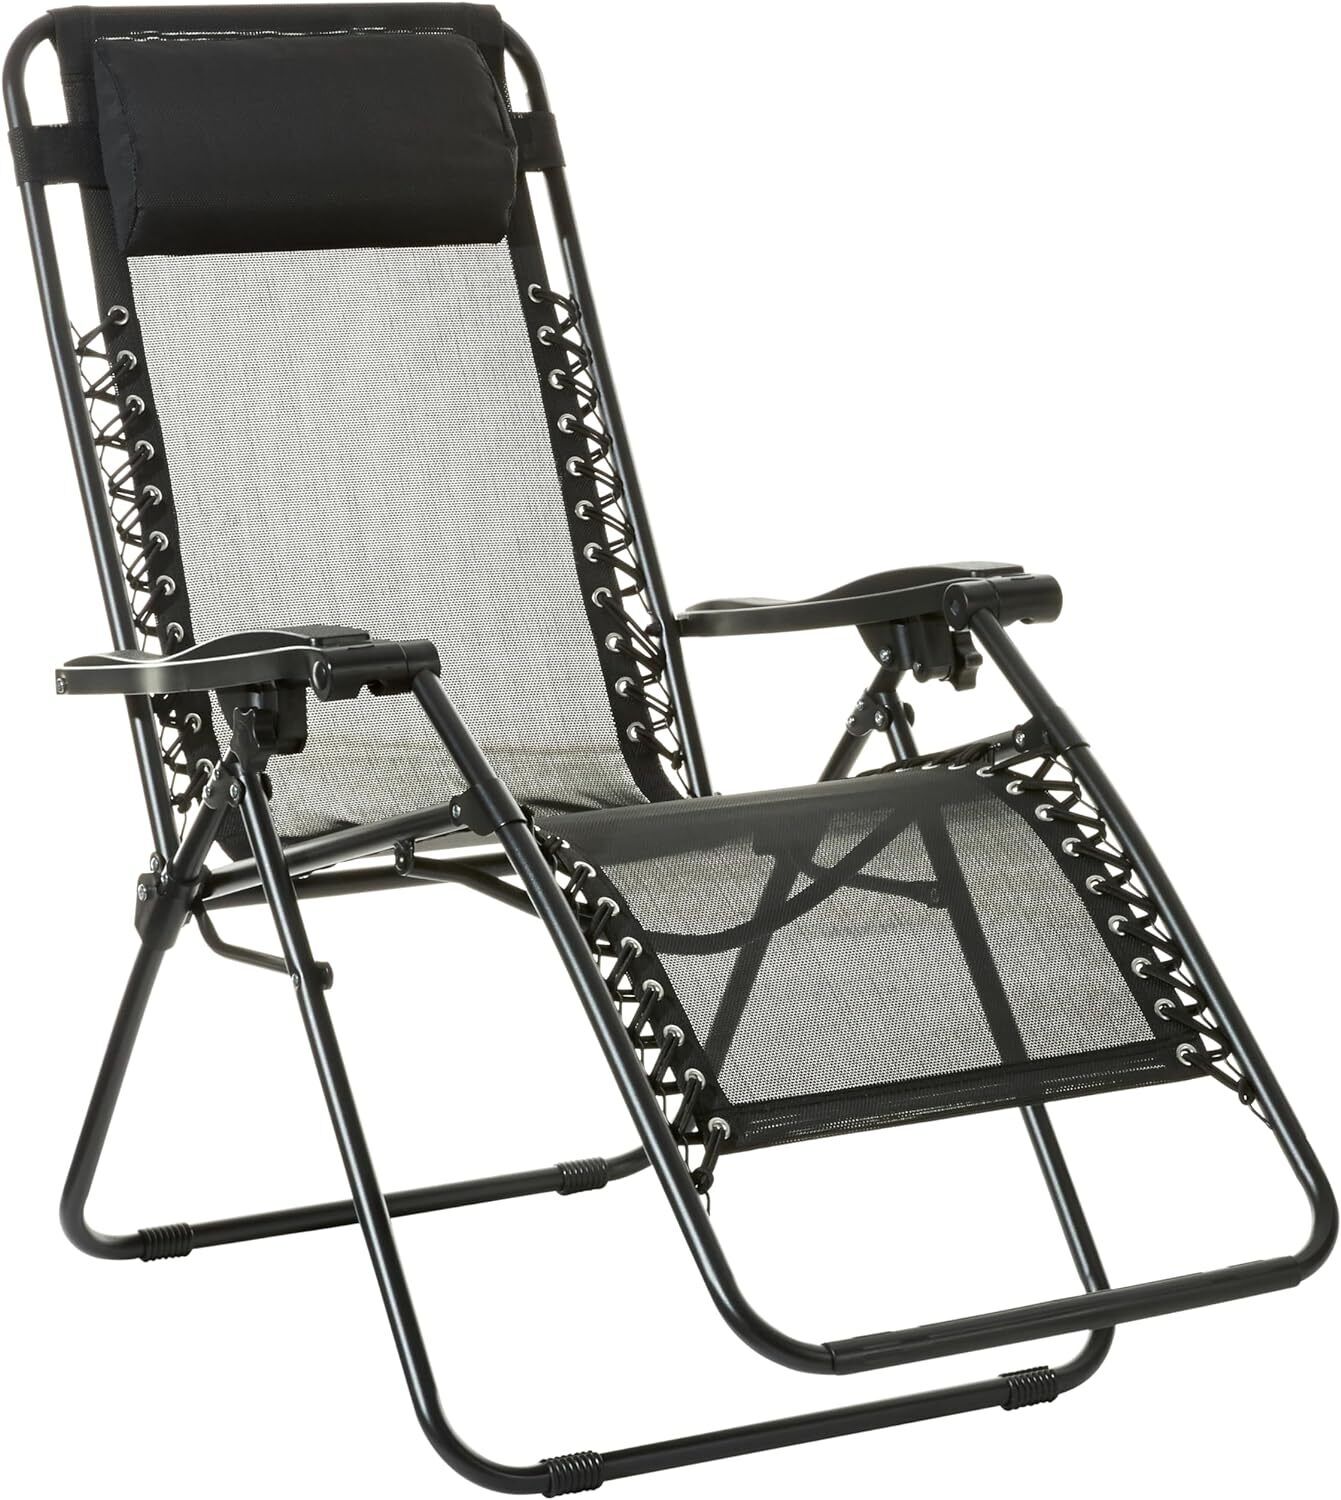 Outdoor Adjustable Zero Gravity Folding Reclining Lounge Chair with Pillow